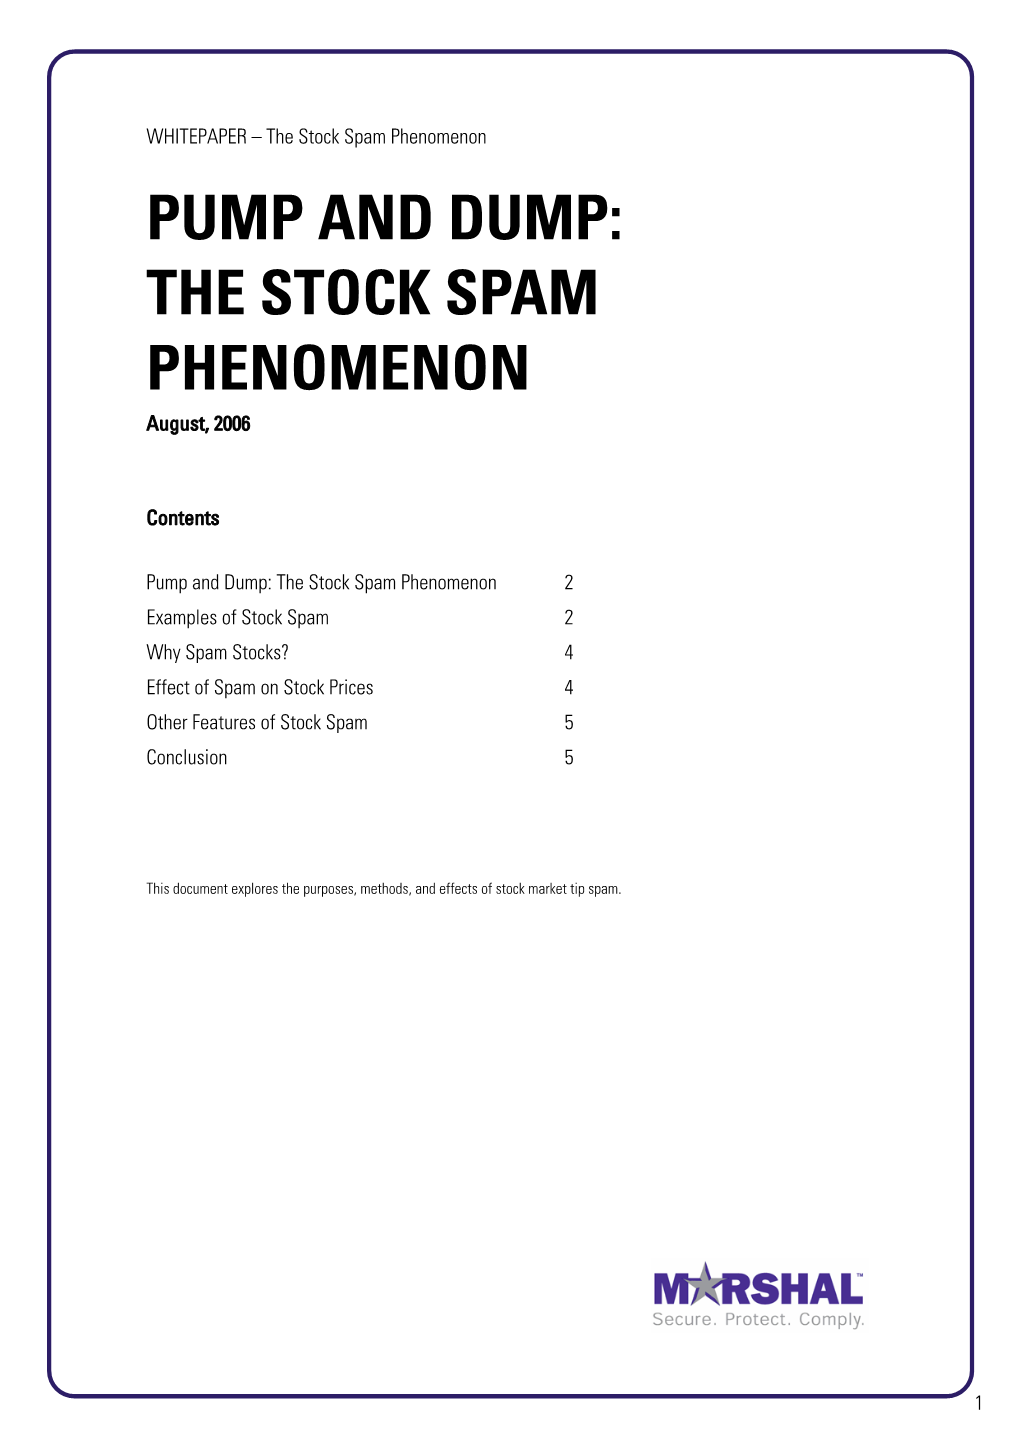 PUMP and DUMP: the STOCK SPAM PHENOMENON August, 2006